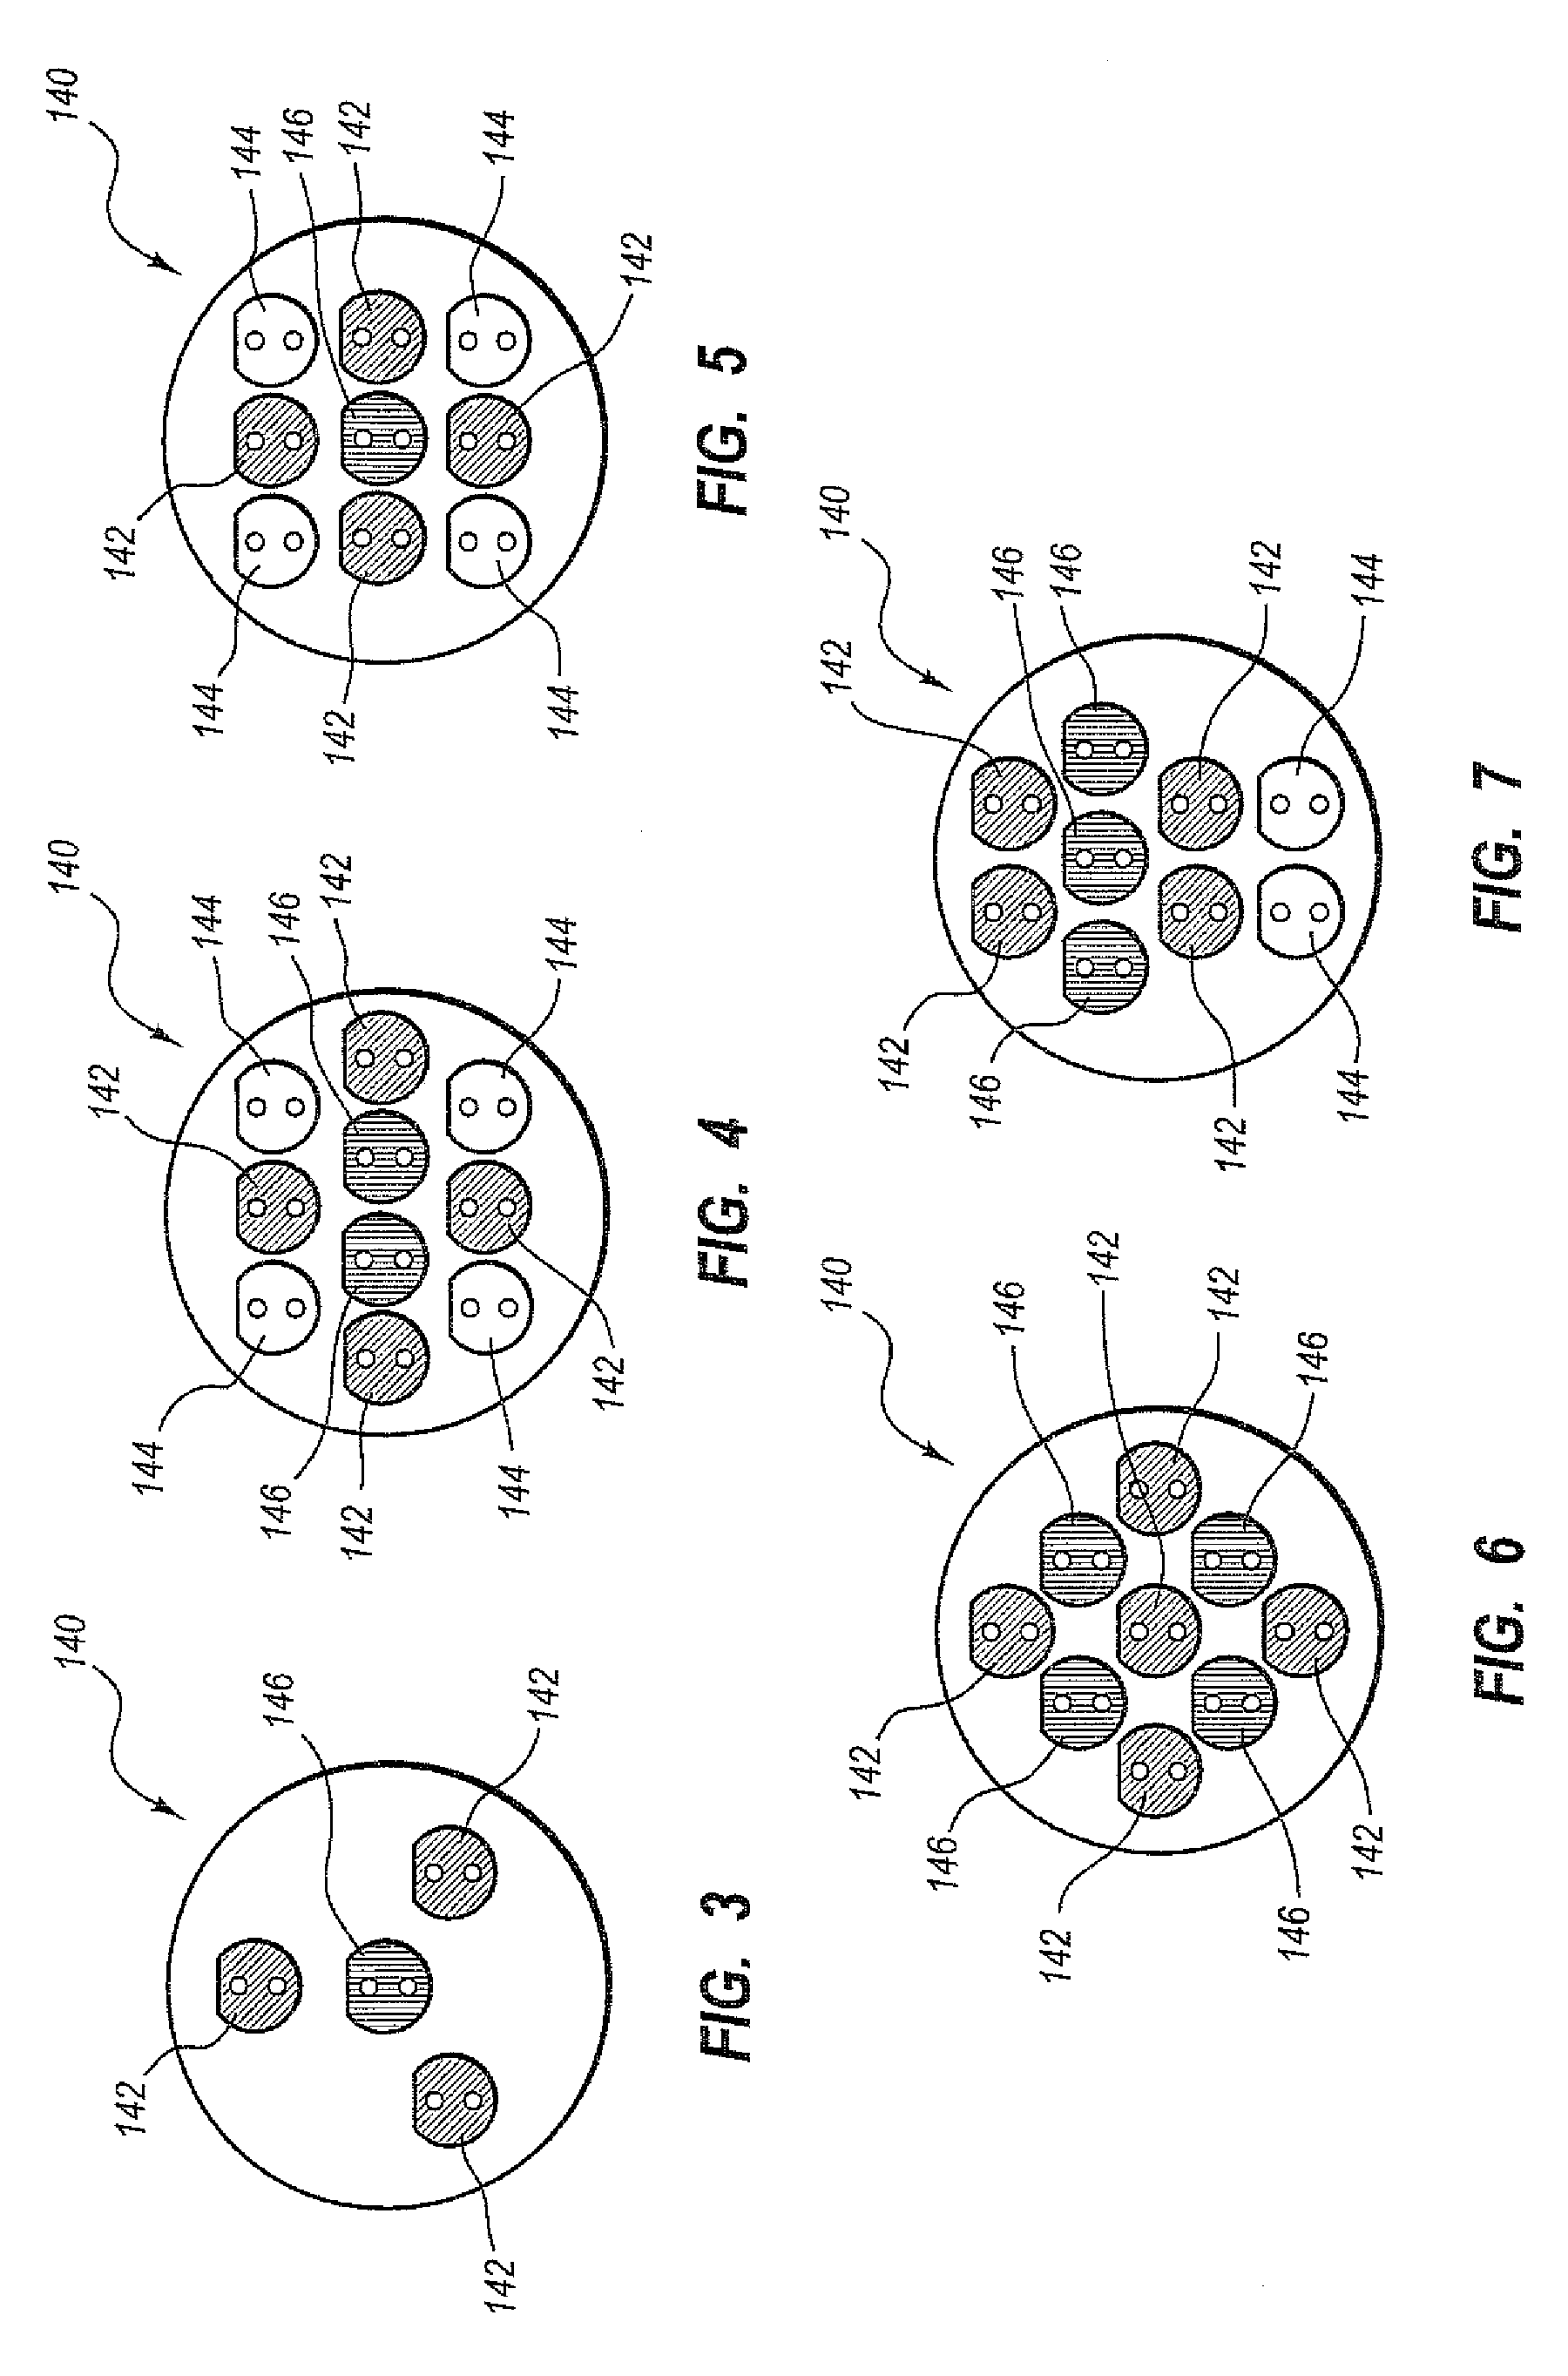 Apparatus and method for illuminating blood